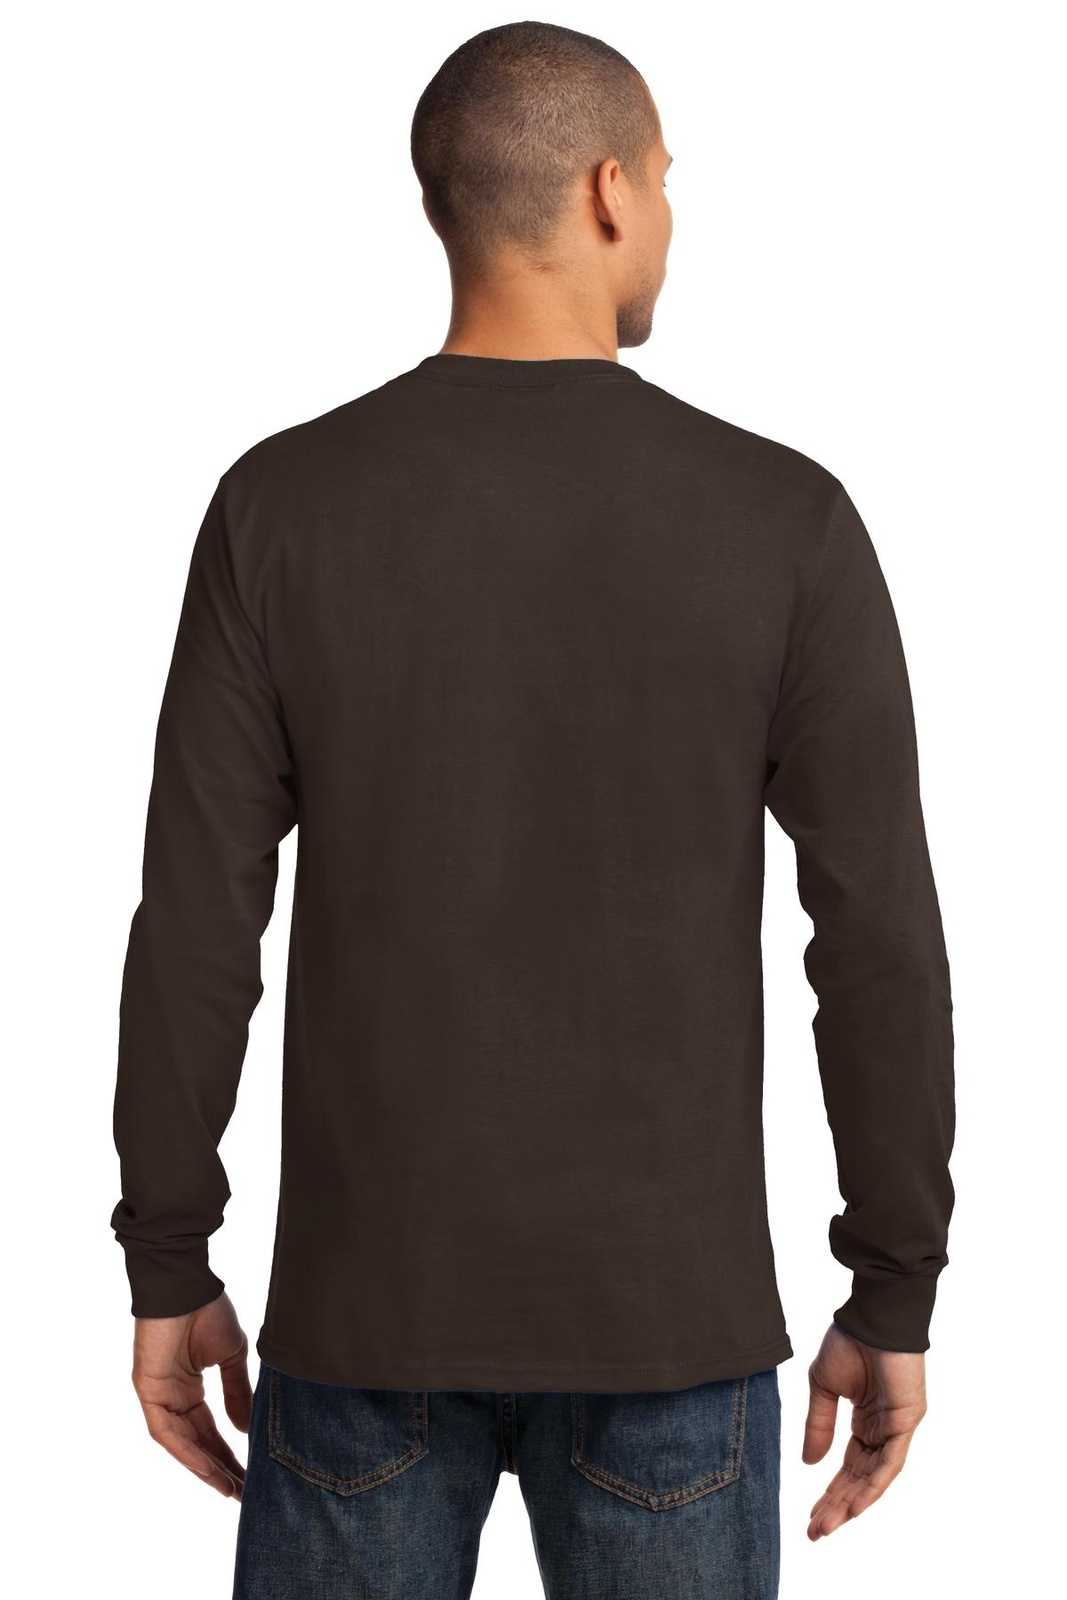 Port & Company PC61LST Tall Long Sleeve Essential Tee - Dark Chocolate Brown - HIT a Double - 1